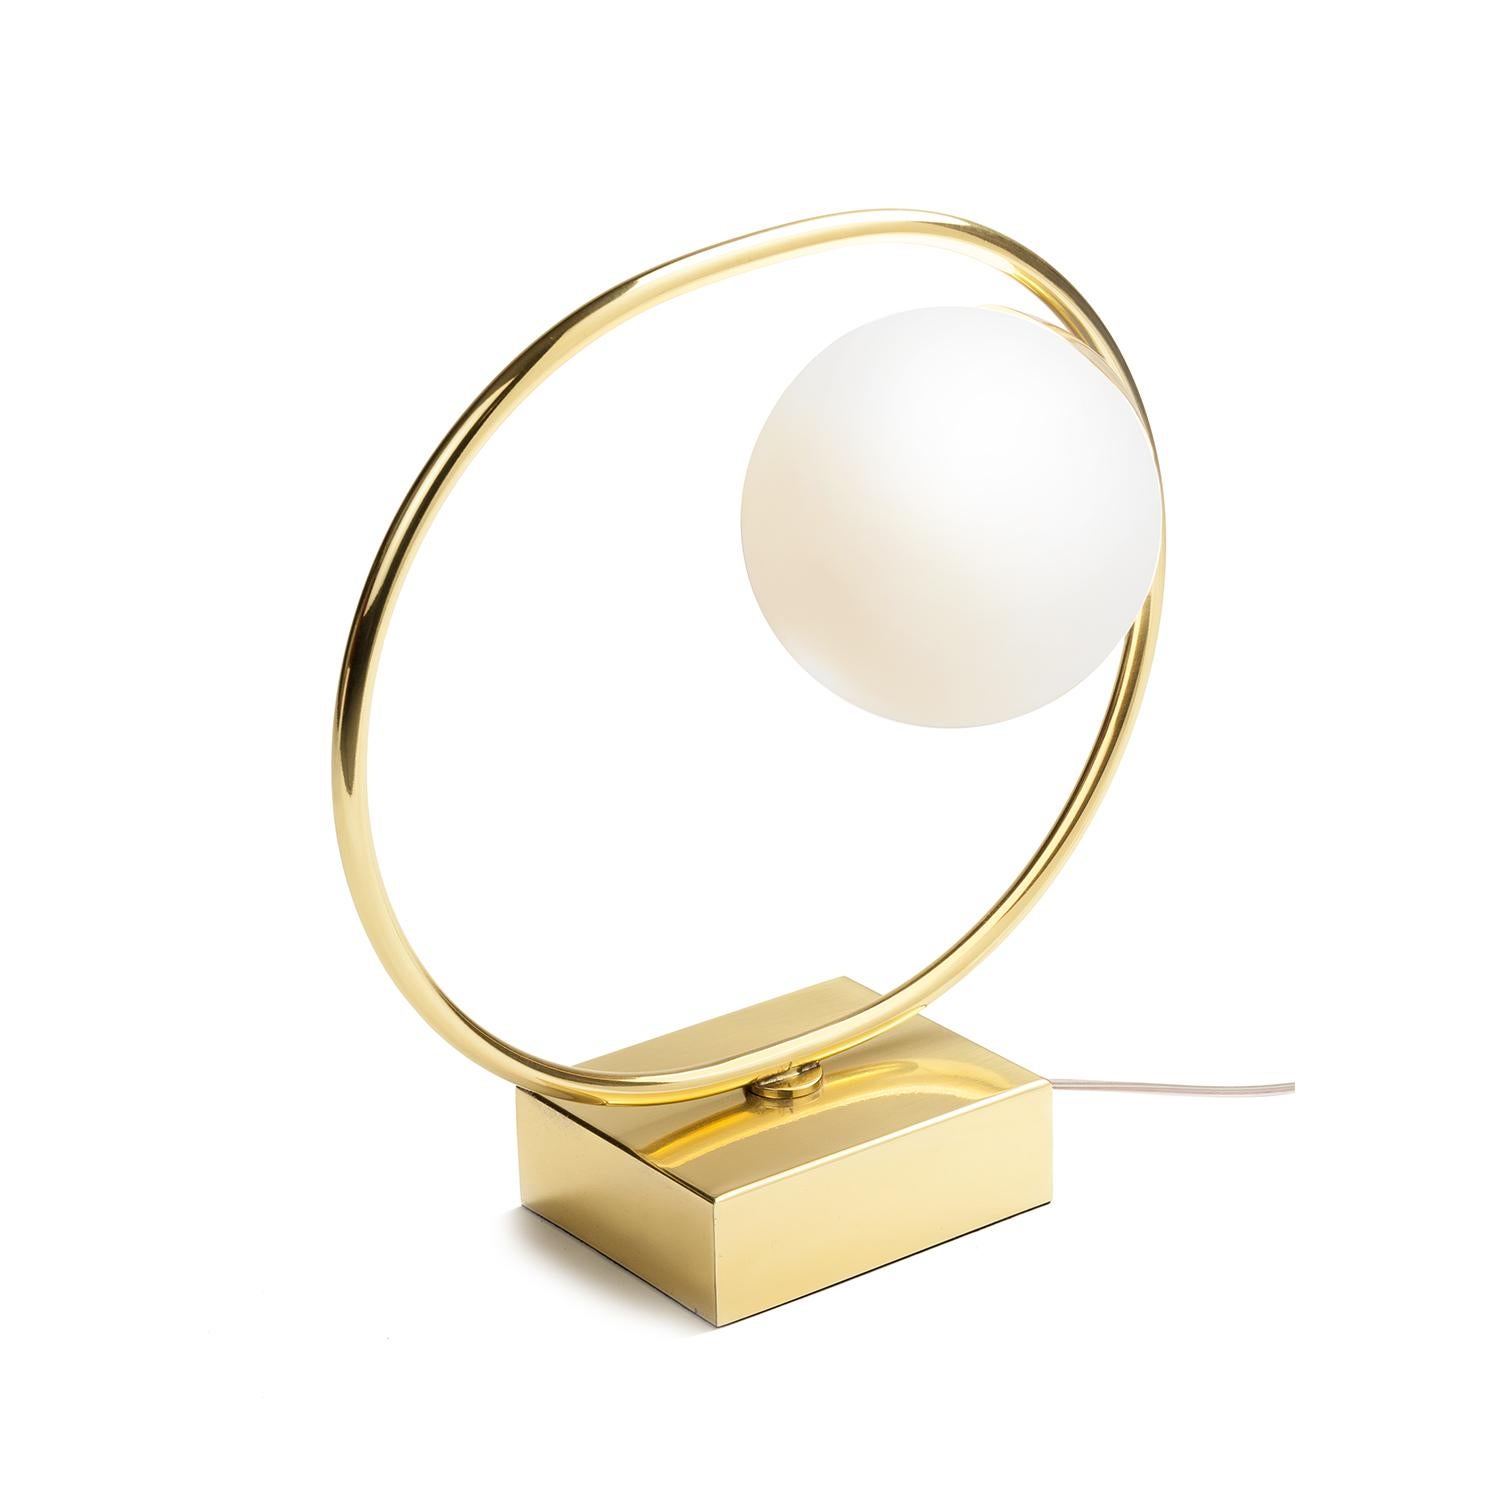 Loop Table Lamp evokes a sense of playfulness thanks to the juxtaposition of primary shapes. It can be used to create a modern yet timeless space and resembles a modern, elegant sculpture, producing a magical luminous atmosphere, with its Art Deco